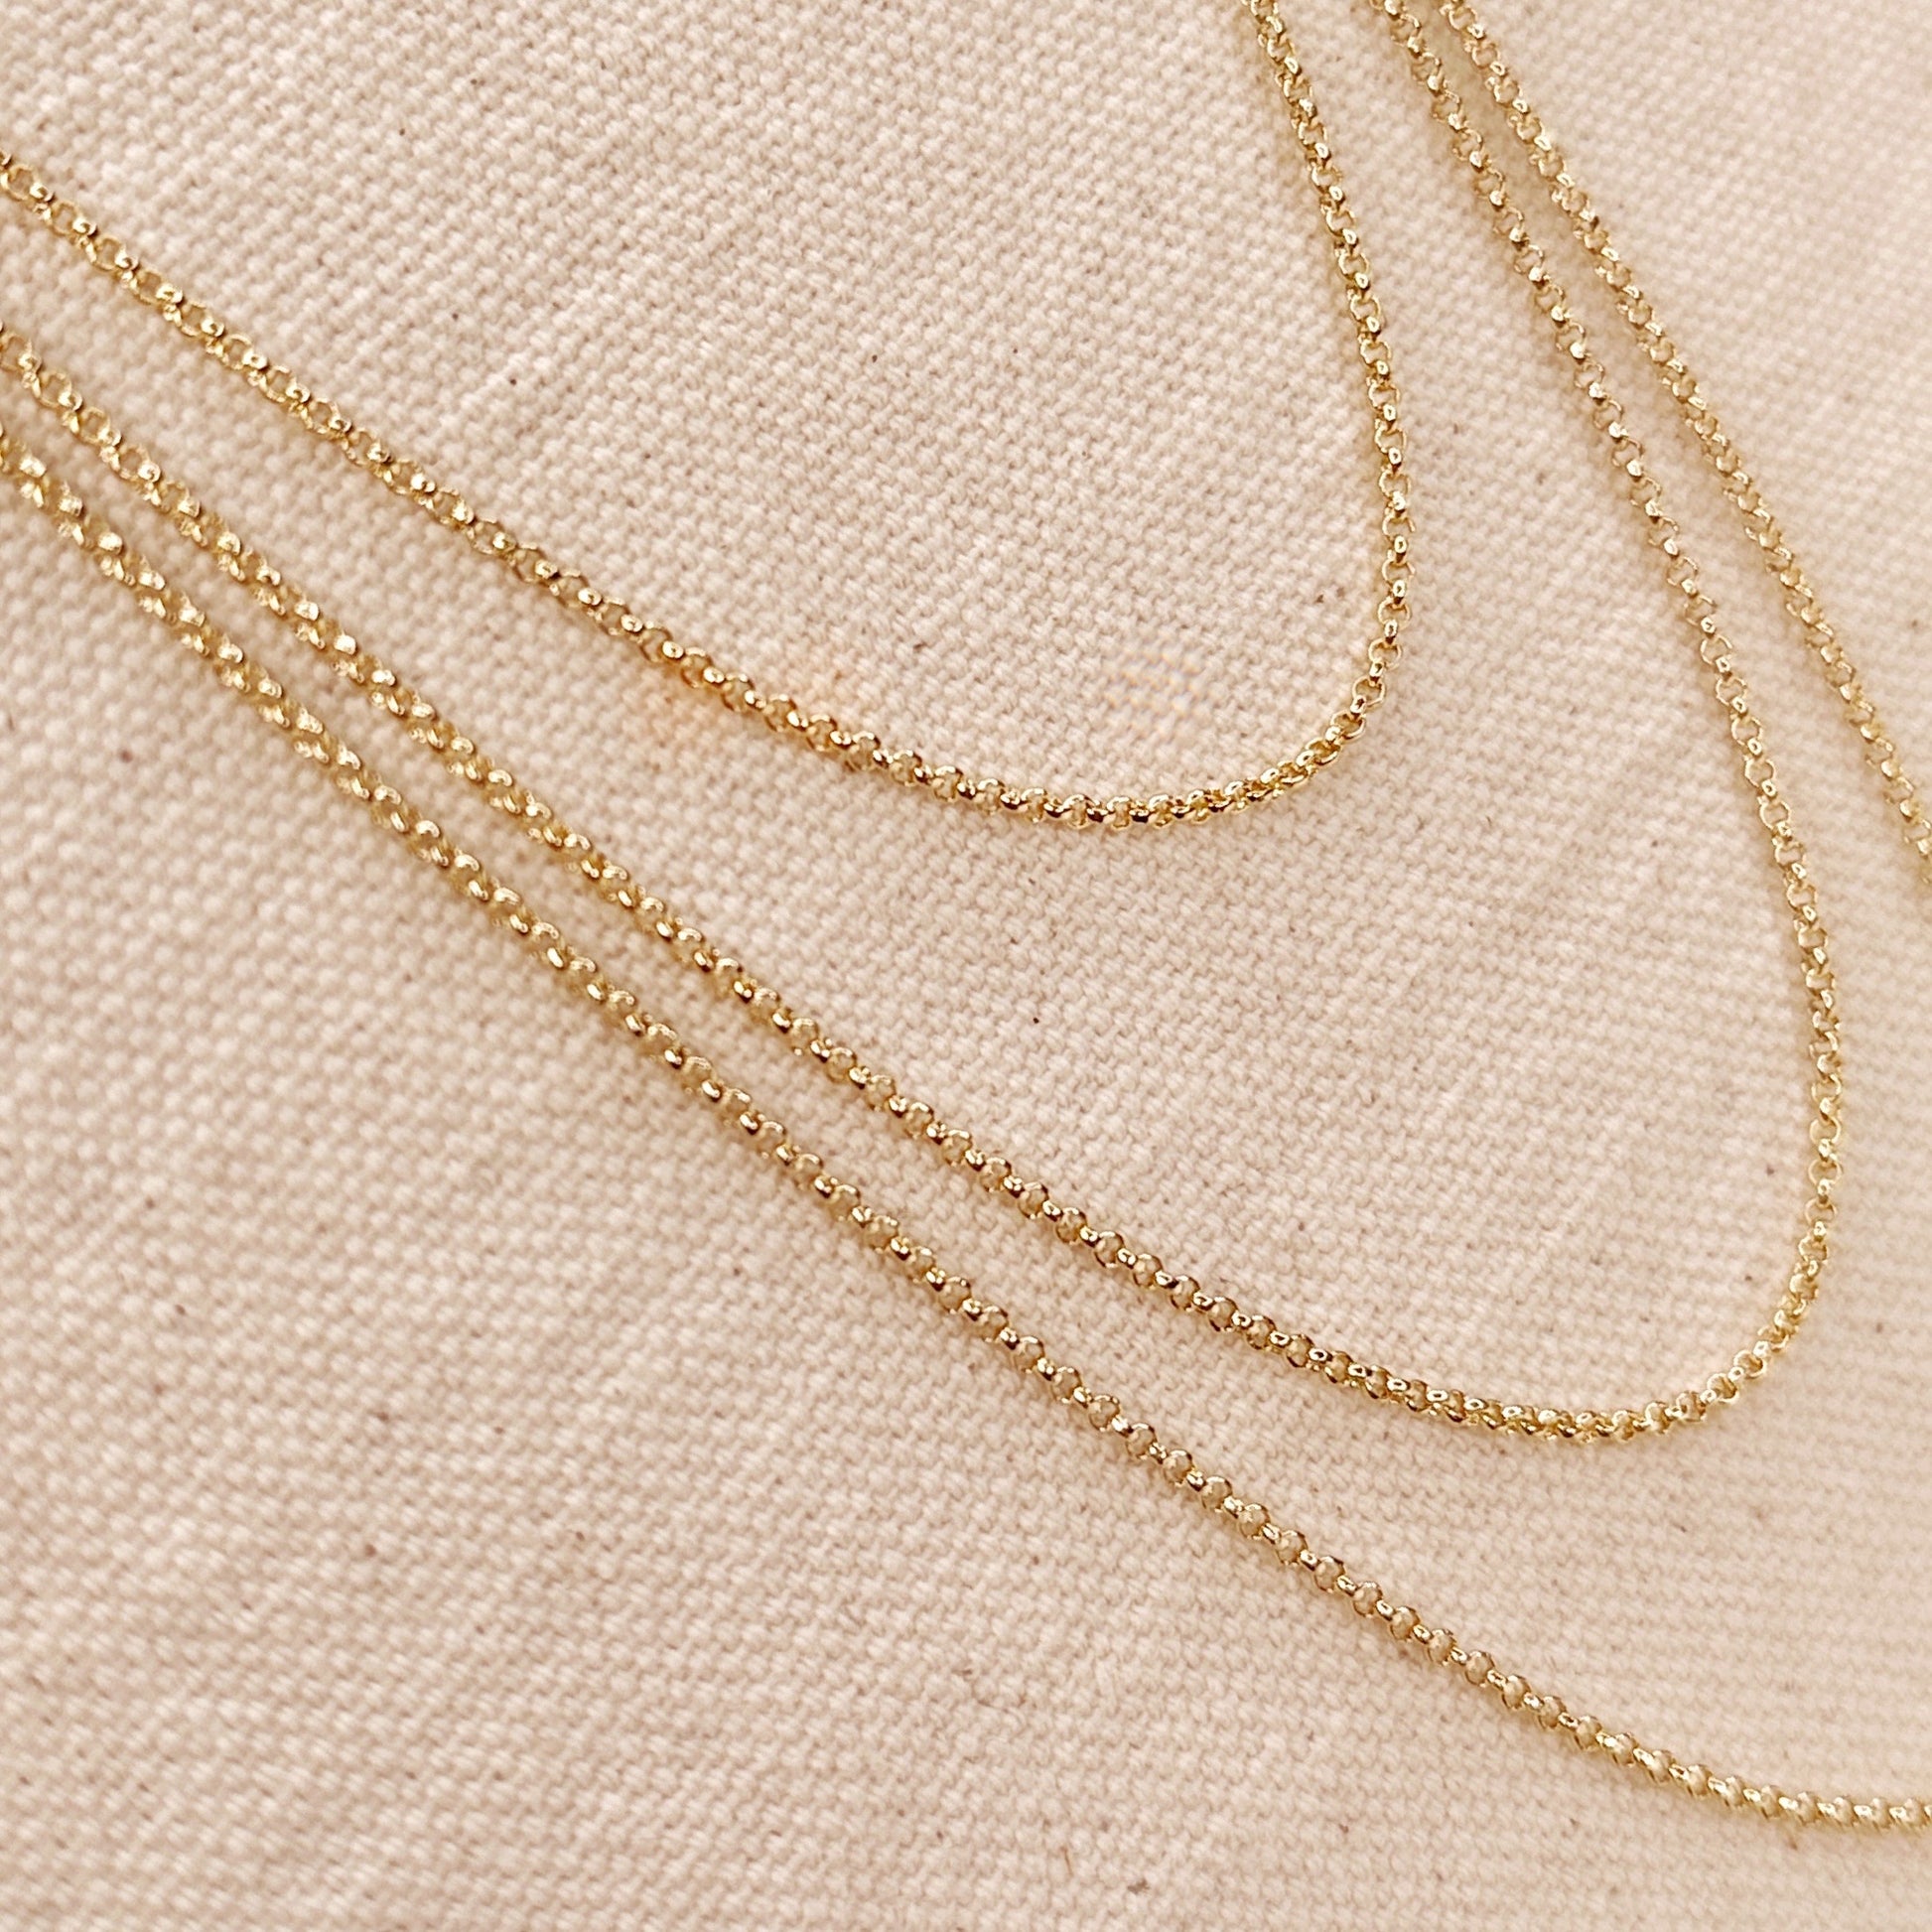 18k Gold Filled 1.5mm Rolo Chain Available in 16, 18, 20, 24